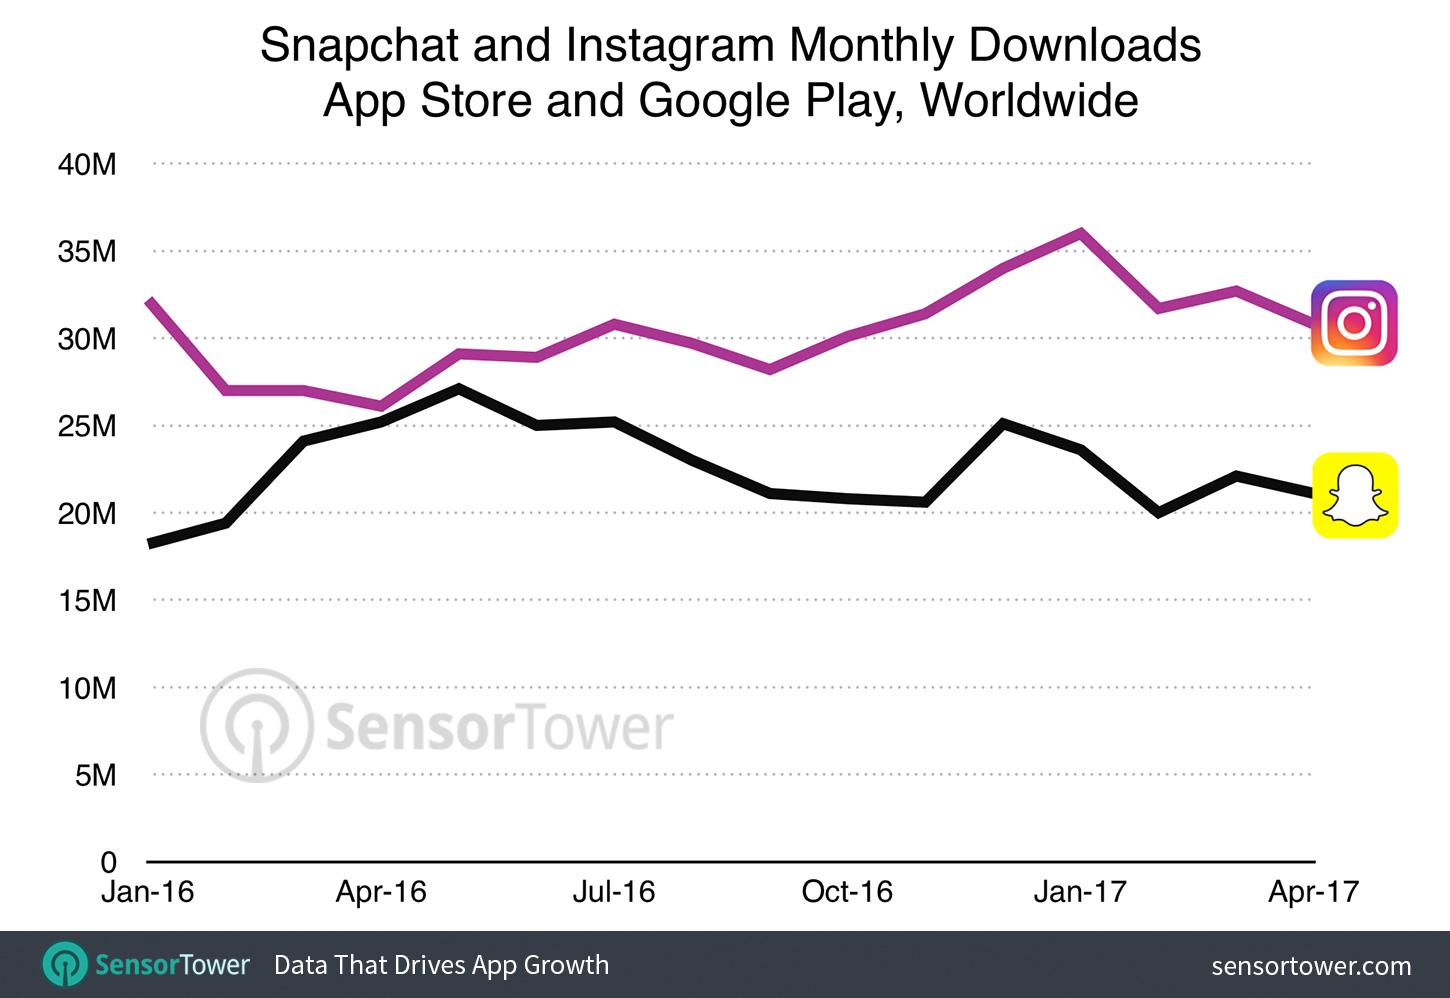 Comparison of Snapchat and Instagram monthly new installs on the App Store and Google Play worldwide